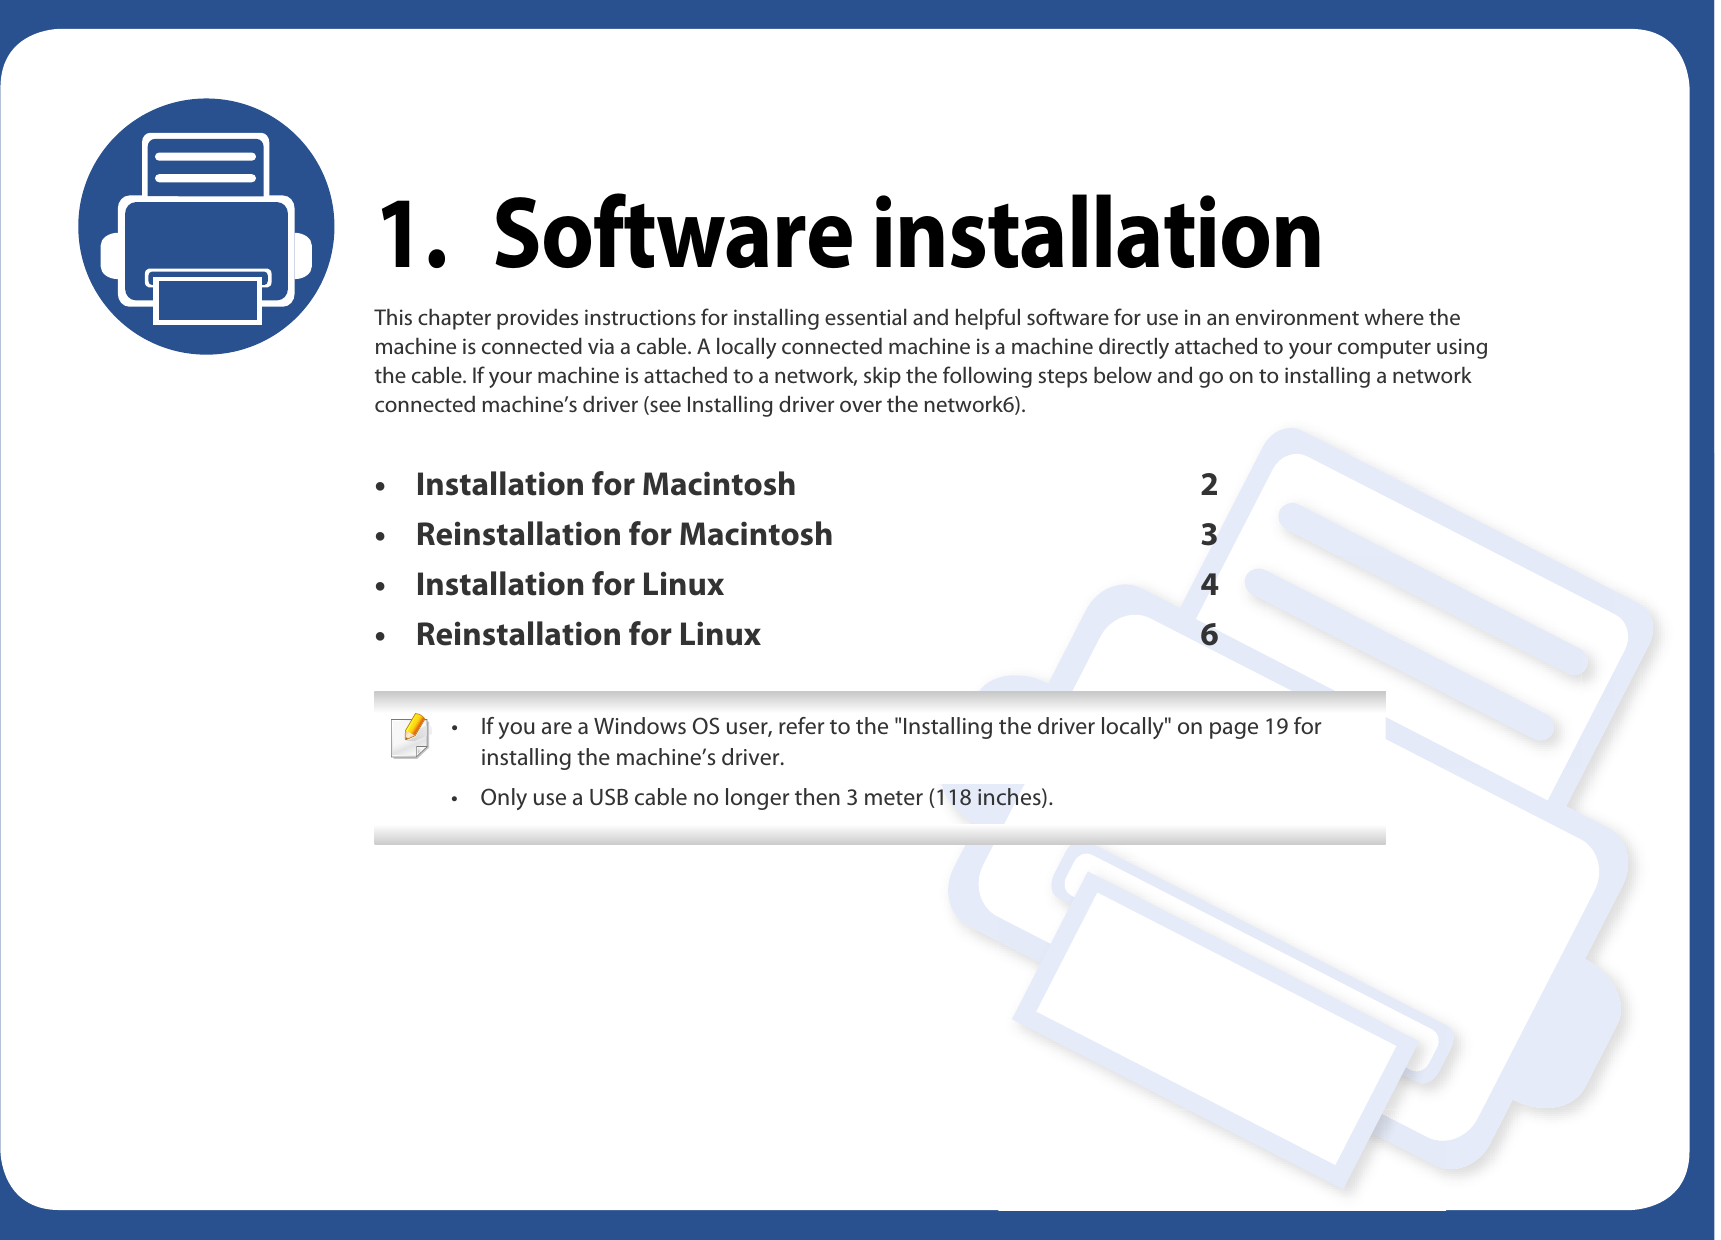 1. Software installationThis chapter provides instructions for installing essential and helpful software for use in an environment where the machine is connected via a cable. A locally connected machine is a machine directly attached to your computer using the cable. If your machine is attached to a network, skip the following steps below and go on to installing a network connected machine’s driver (see Installing driver over the network6).• Installation for Macintosh 2• Reinstallation for Macintosh 3• Installation for Linux 4• Reinstallation for Linux 6 • If you are a Windows OS user, refer to the &quot;Installing the driver locally&quot; on page 19 for installing the machine’s driver.• Only use a USB cable no longer then 3 meter (118 inches). 